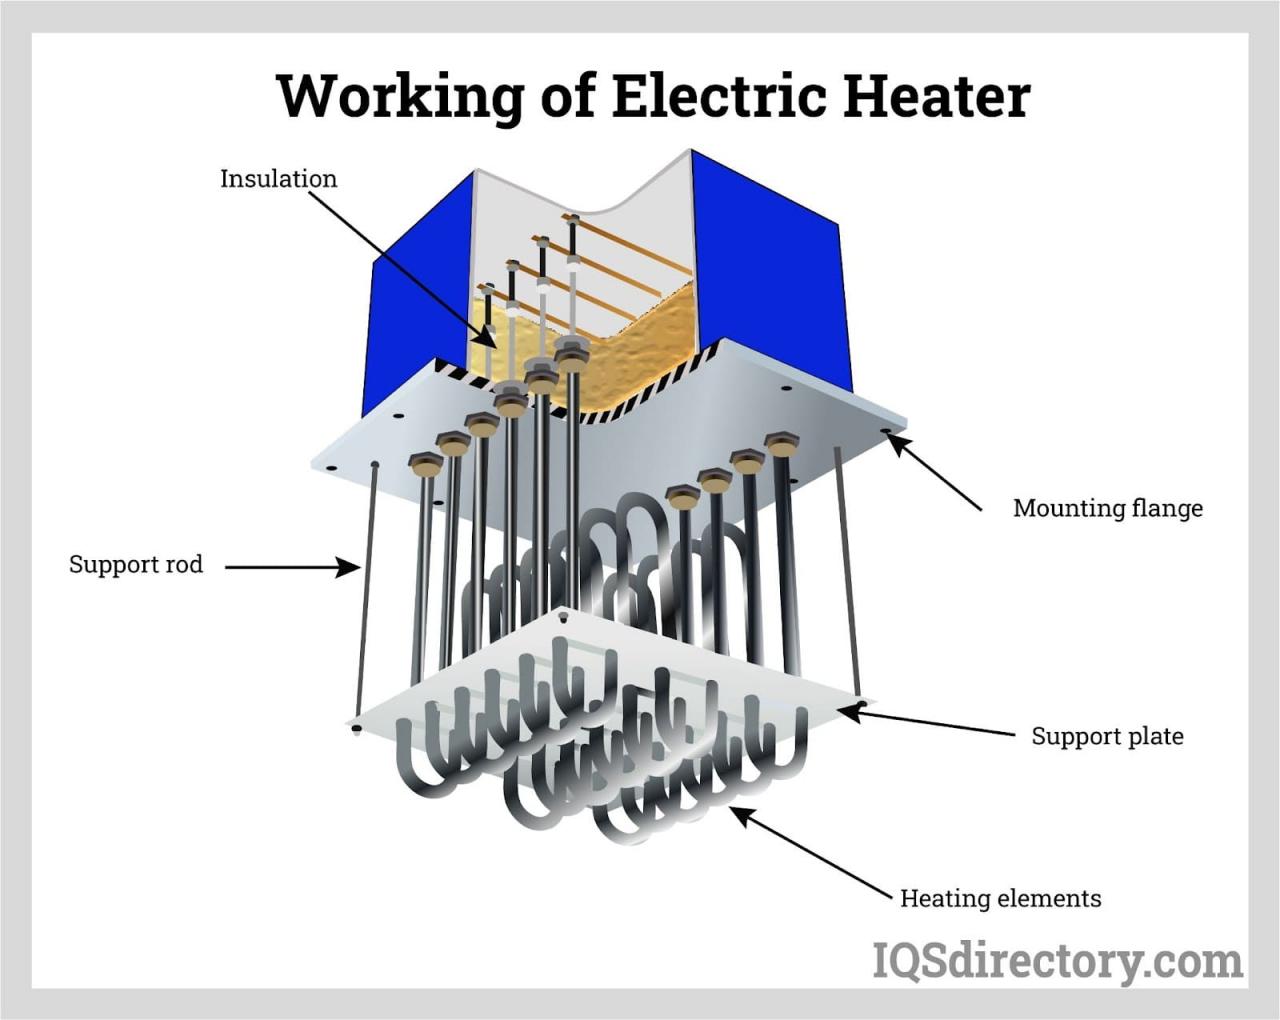 An electric heater is constructed by applying a potential difference